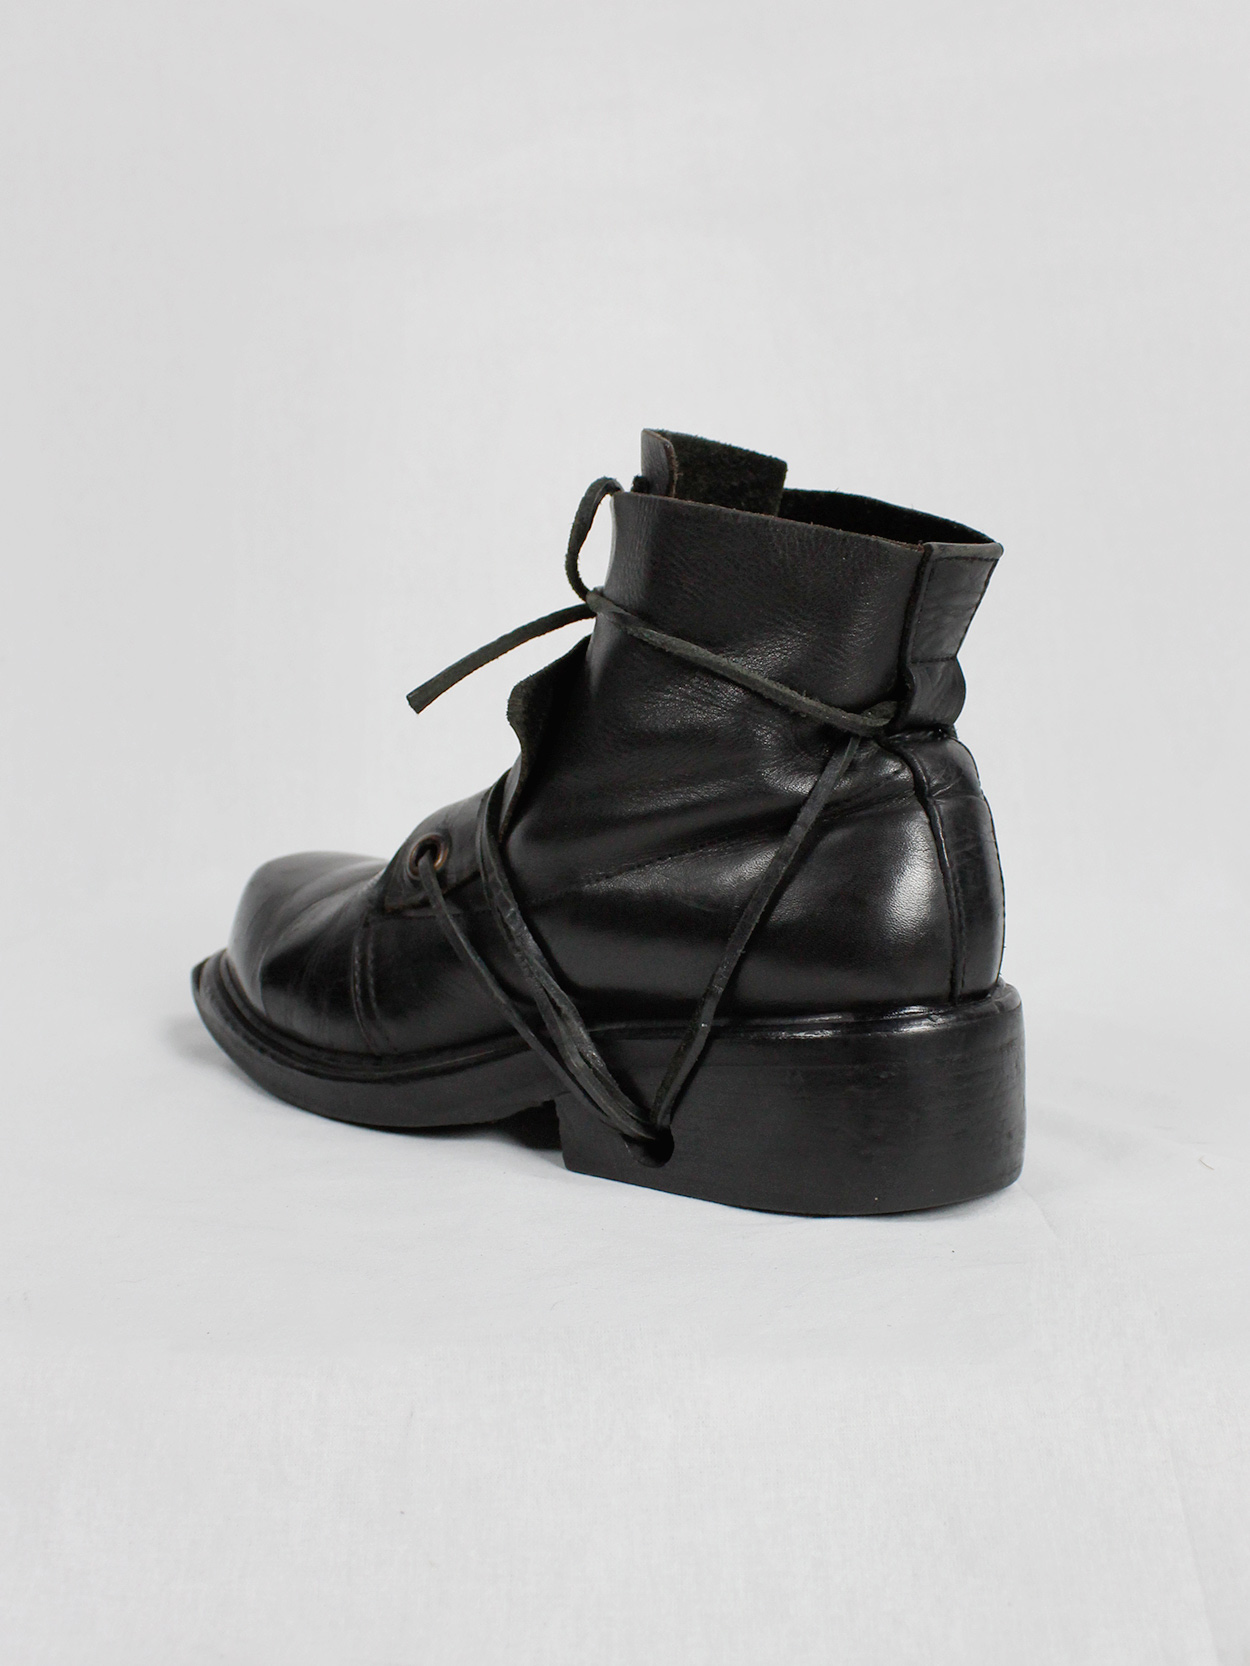 Dirk Bikkembergs black mountaineering boots with laces through the ...